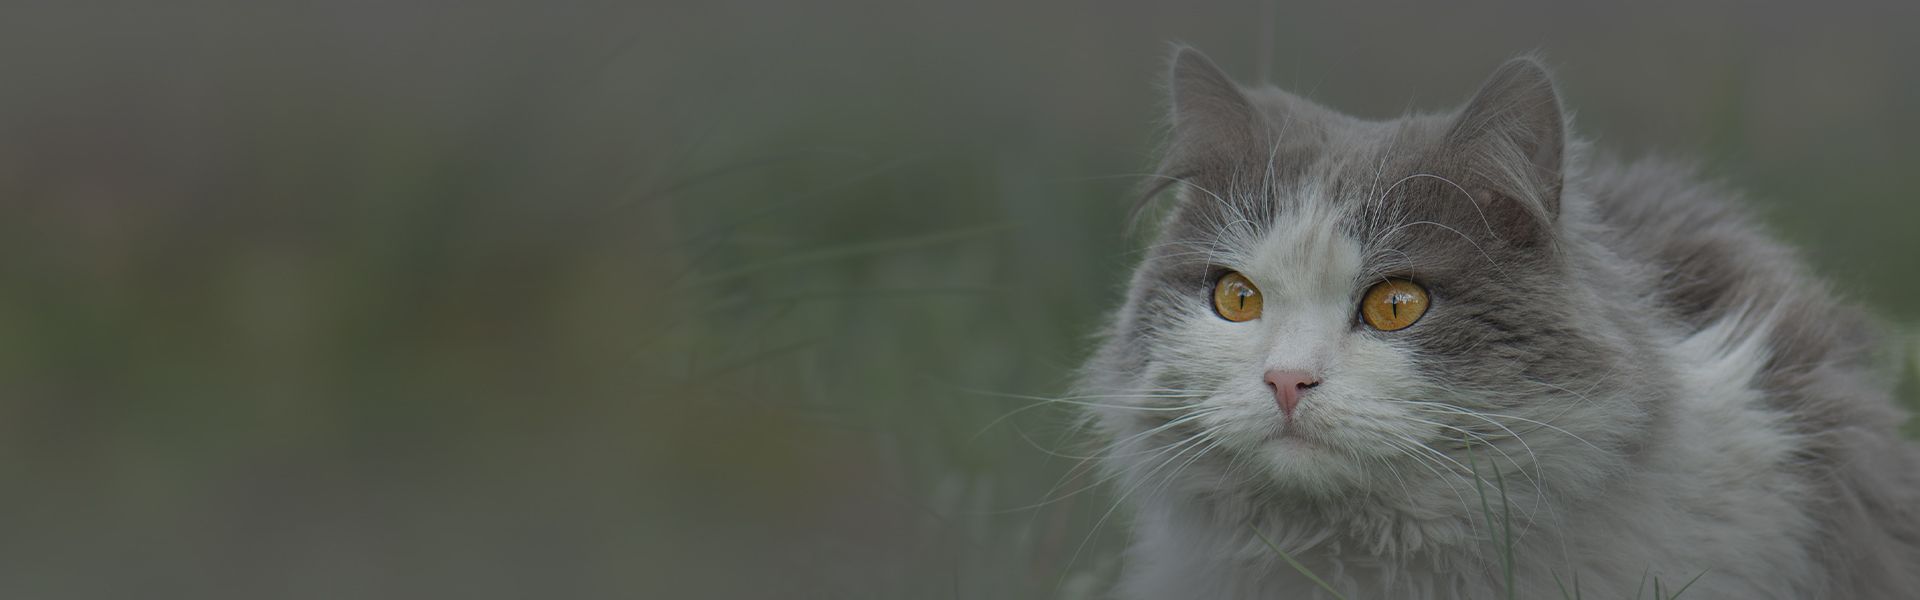 fluffy gray and white cat